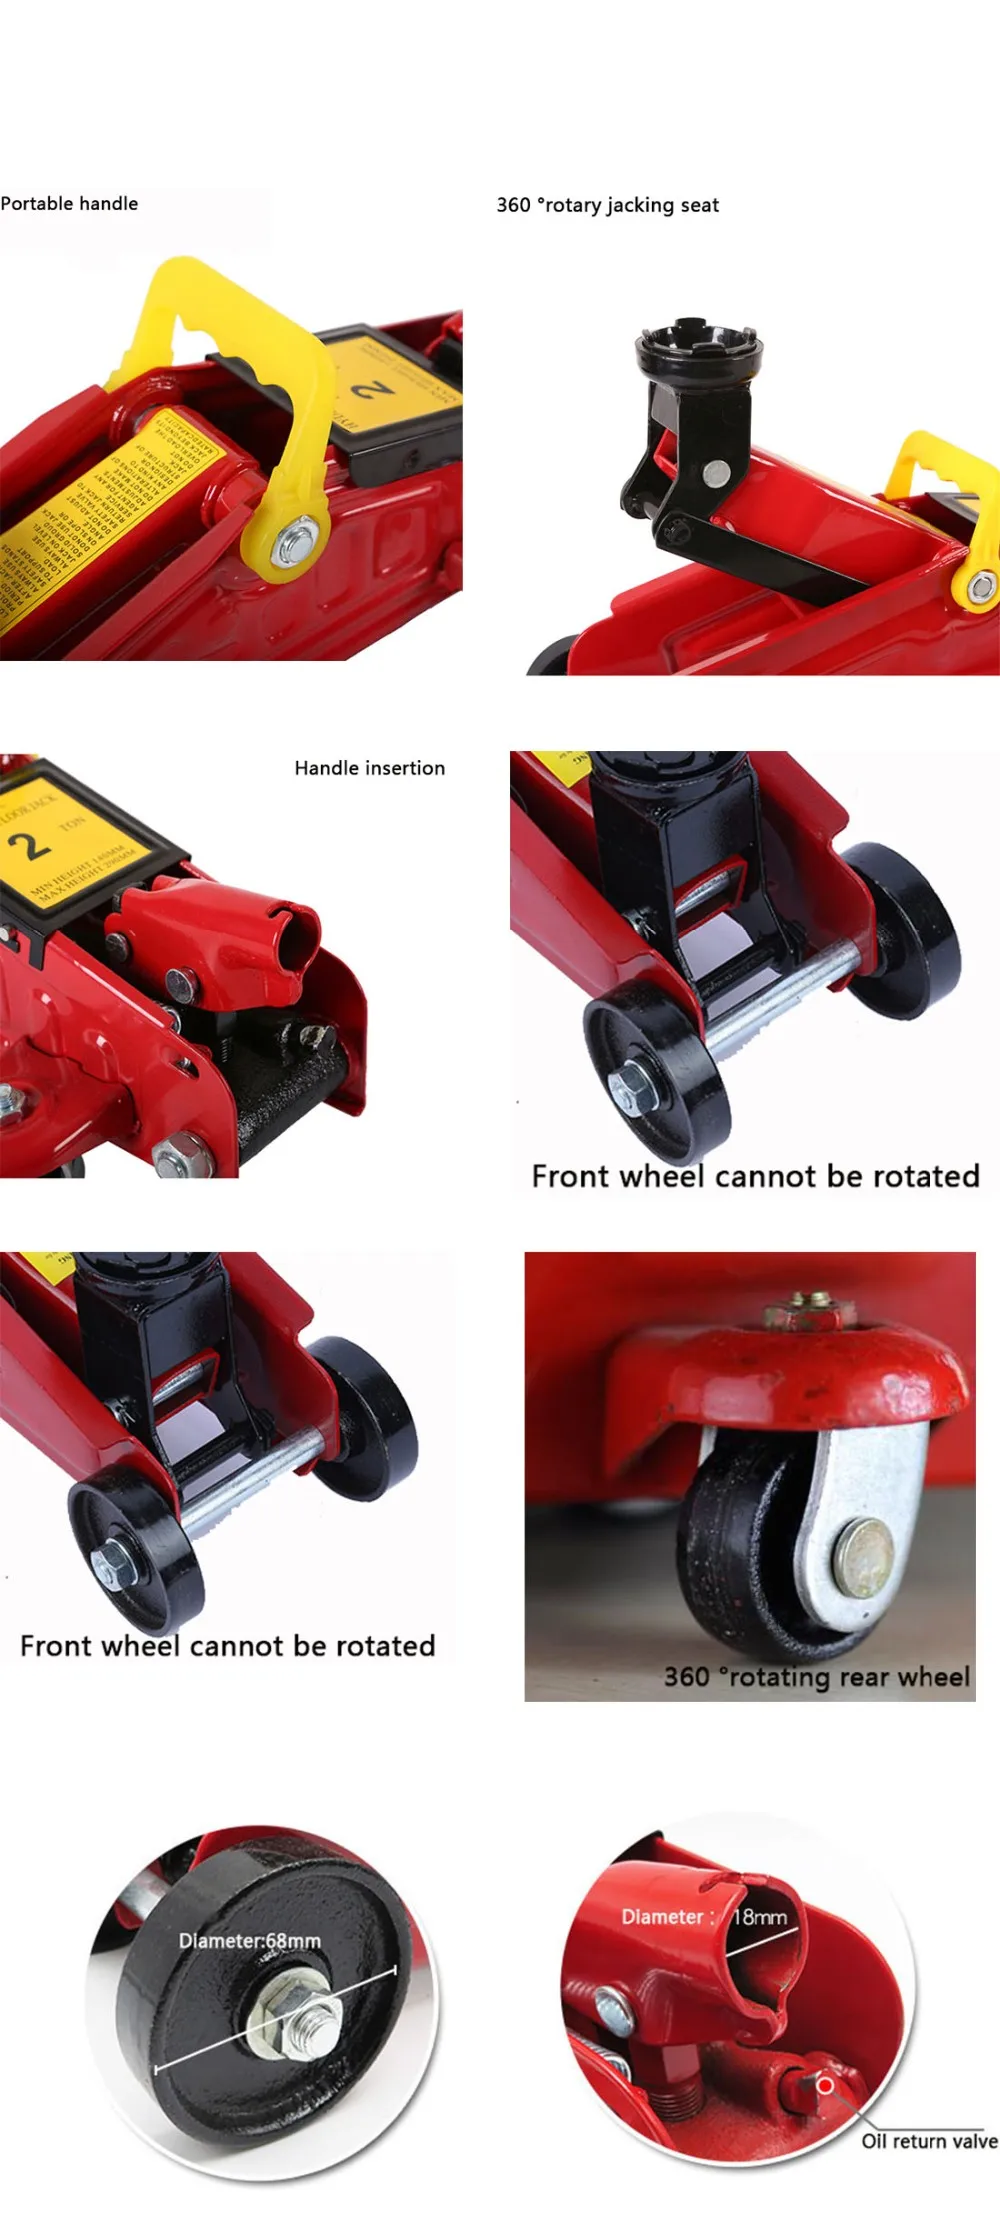 Hot Sale Car Hydraulic Jack Price - Buy Car Accessories Craftsman High Lift  Vehicle Jack Truck Jack,Hi Lift Jack Mount Low Profile Tall Jack Stand,Car  Accessories Shop Favorite Compact Warehouse Equipment Quick